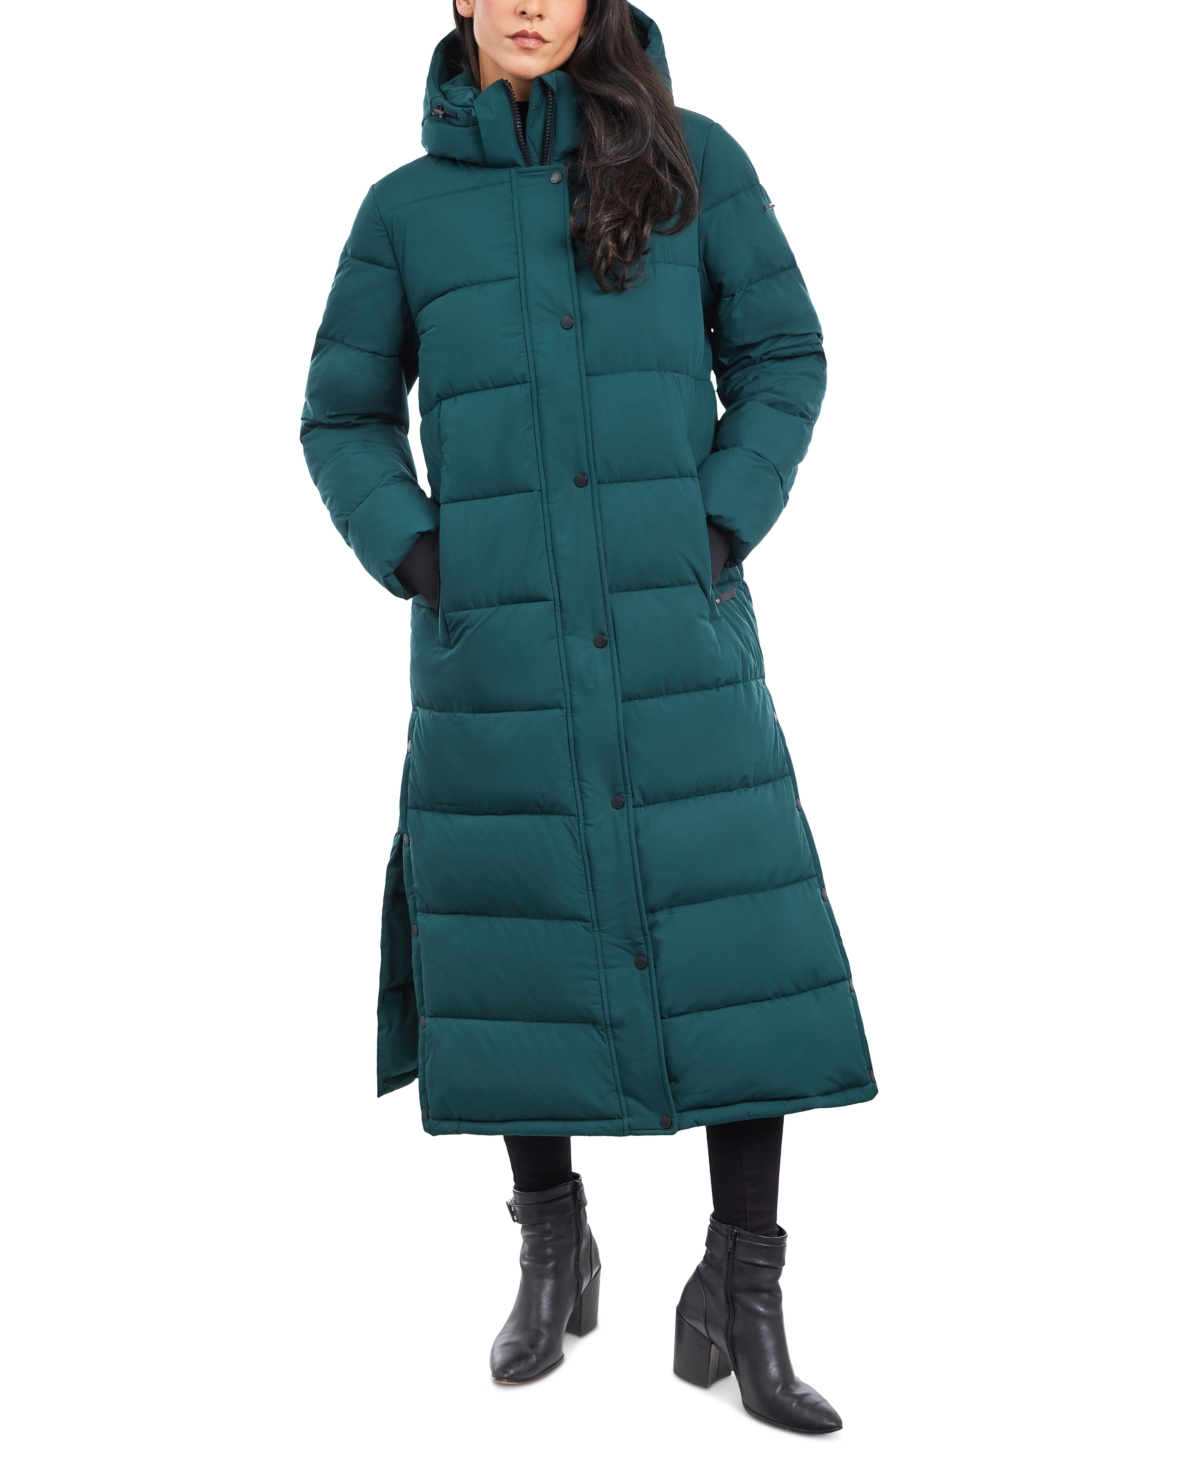 BCBGeneration Shawl-Collar Hooded Wrap Coat for Sale in